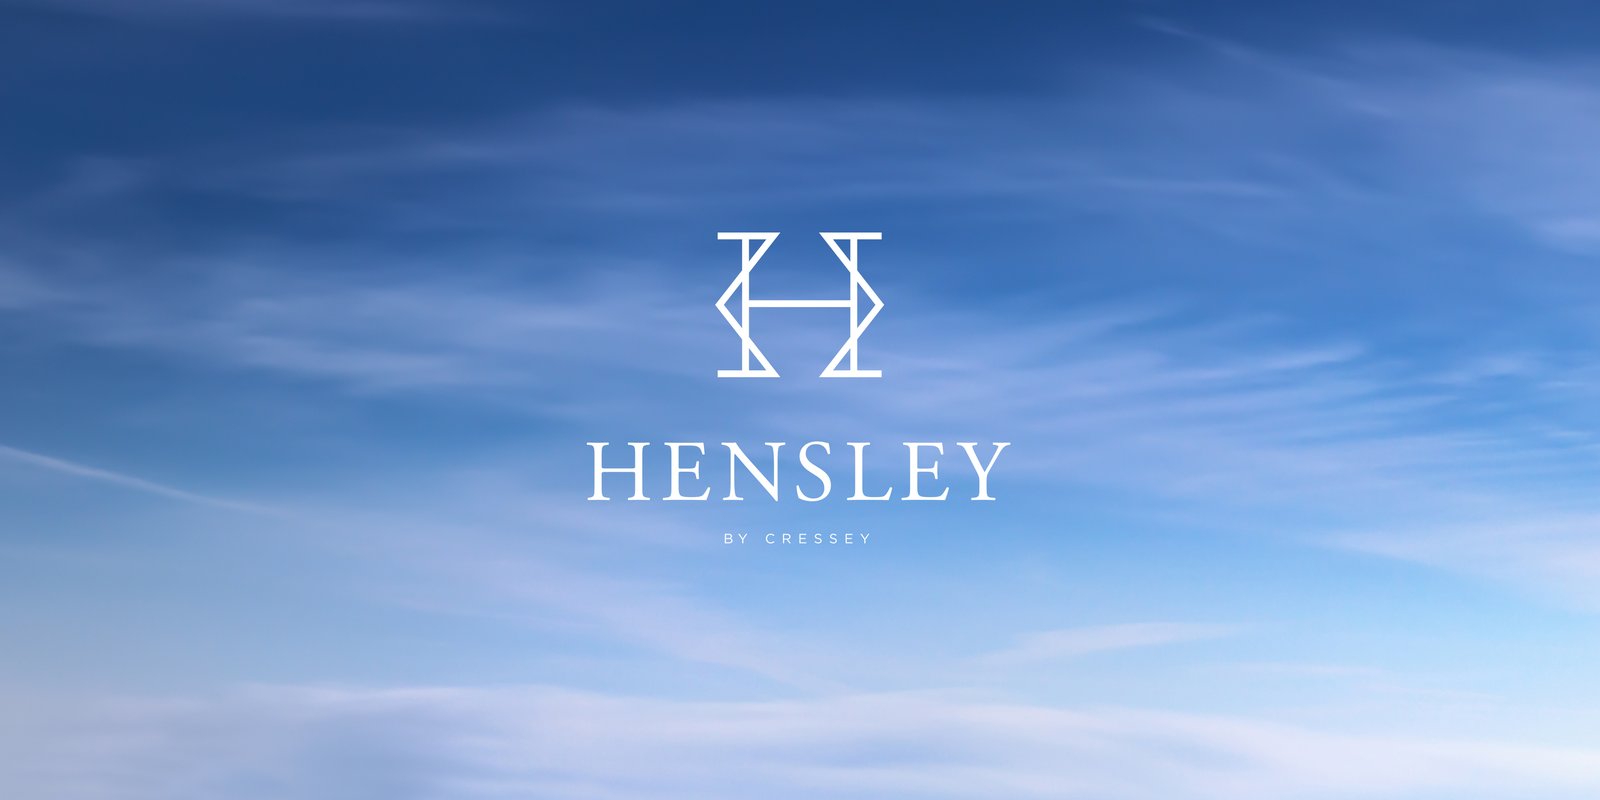 HENSLEY BY CRESSEY